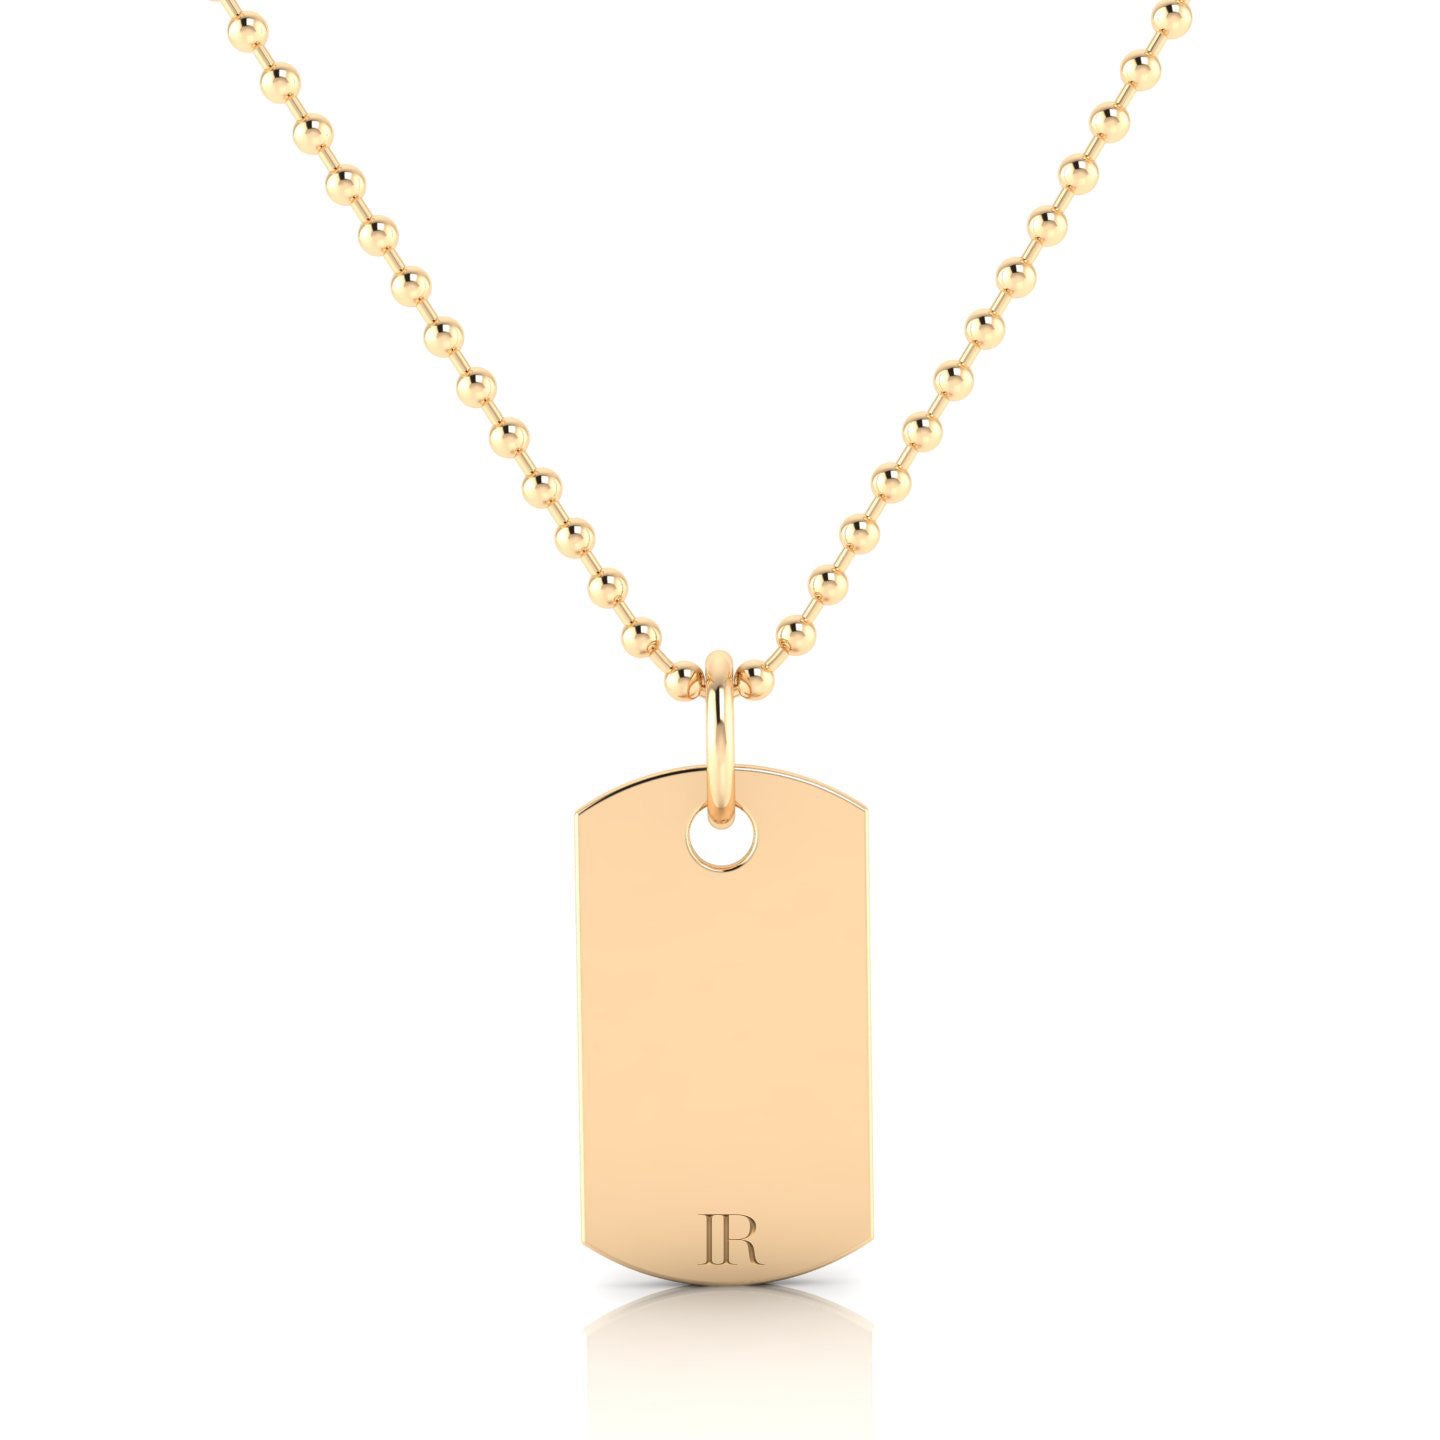 Elon Squadra Pendant Too in 14kt yellow gold, back view of pendant